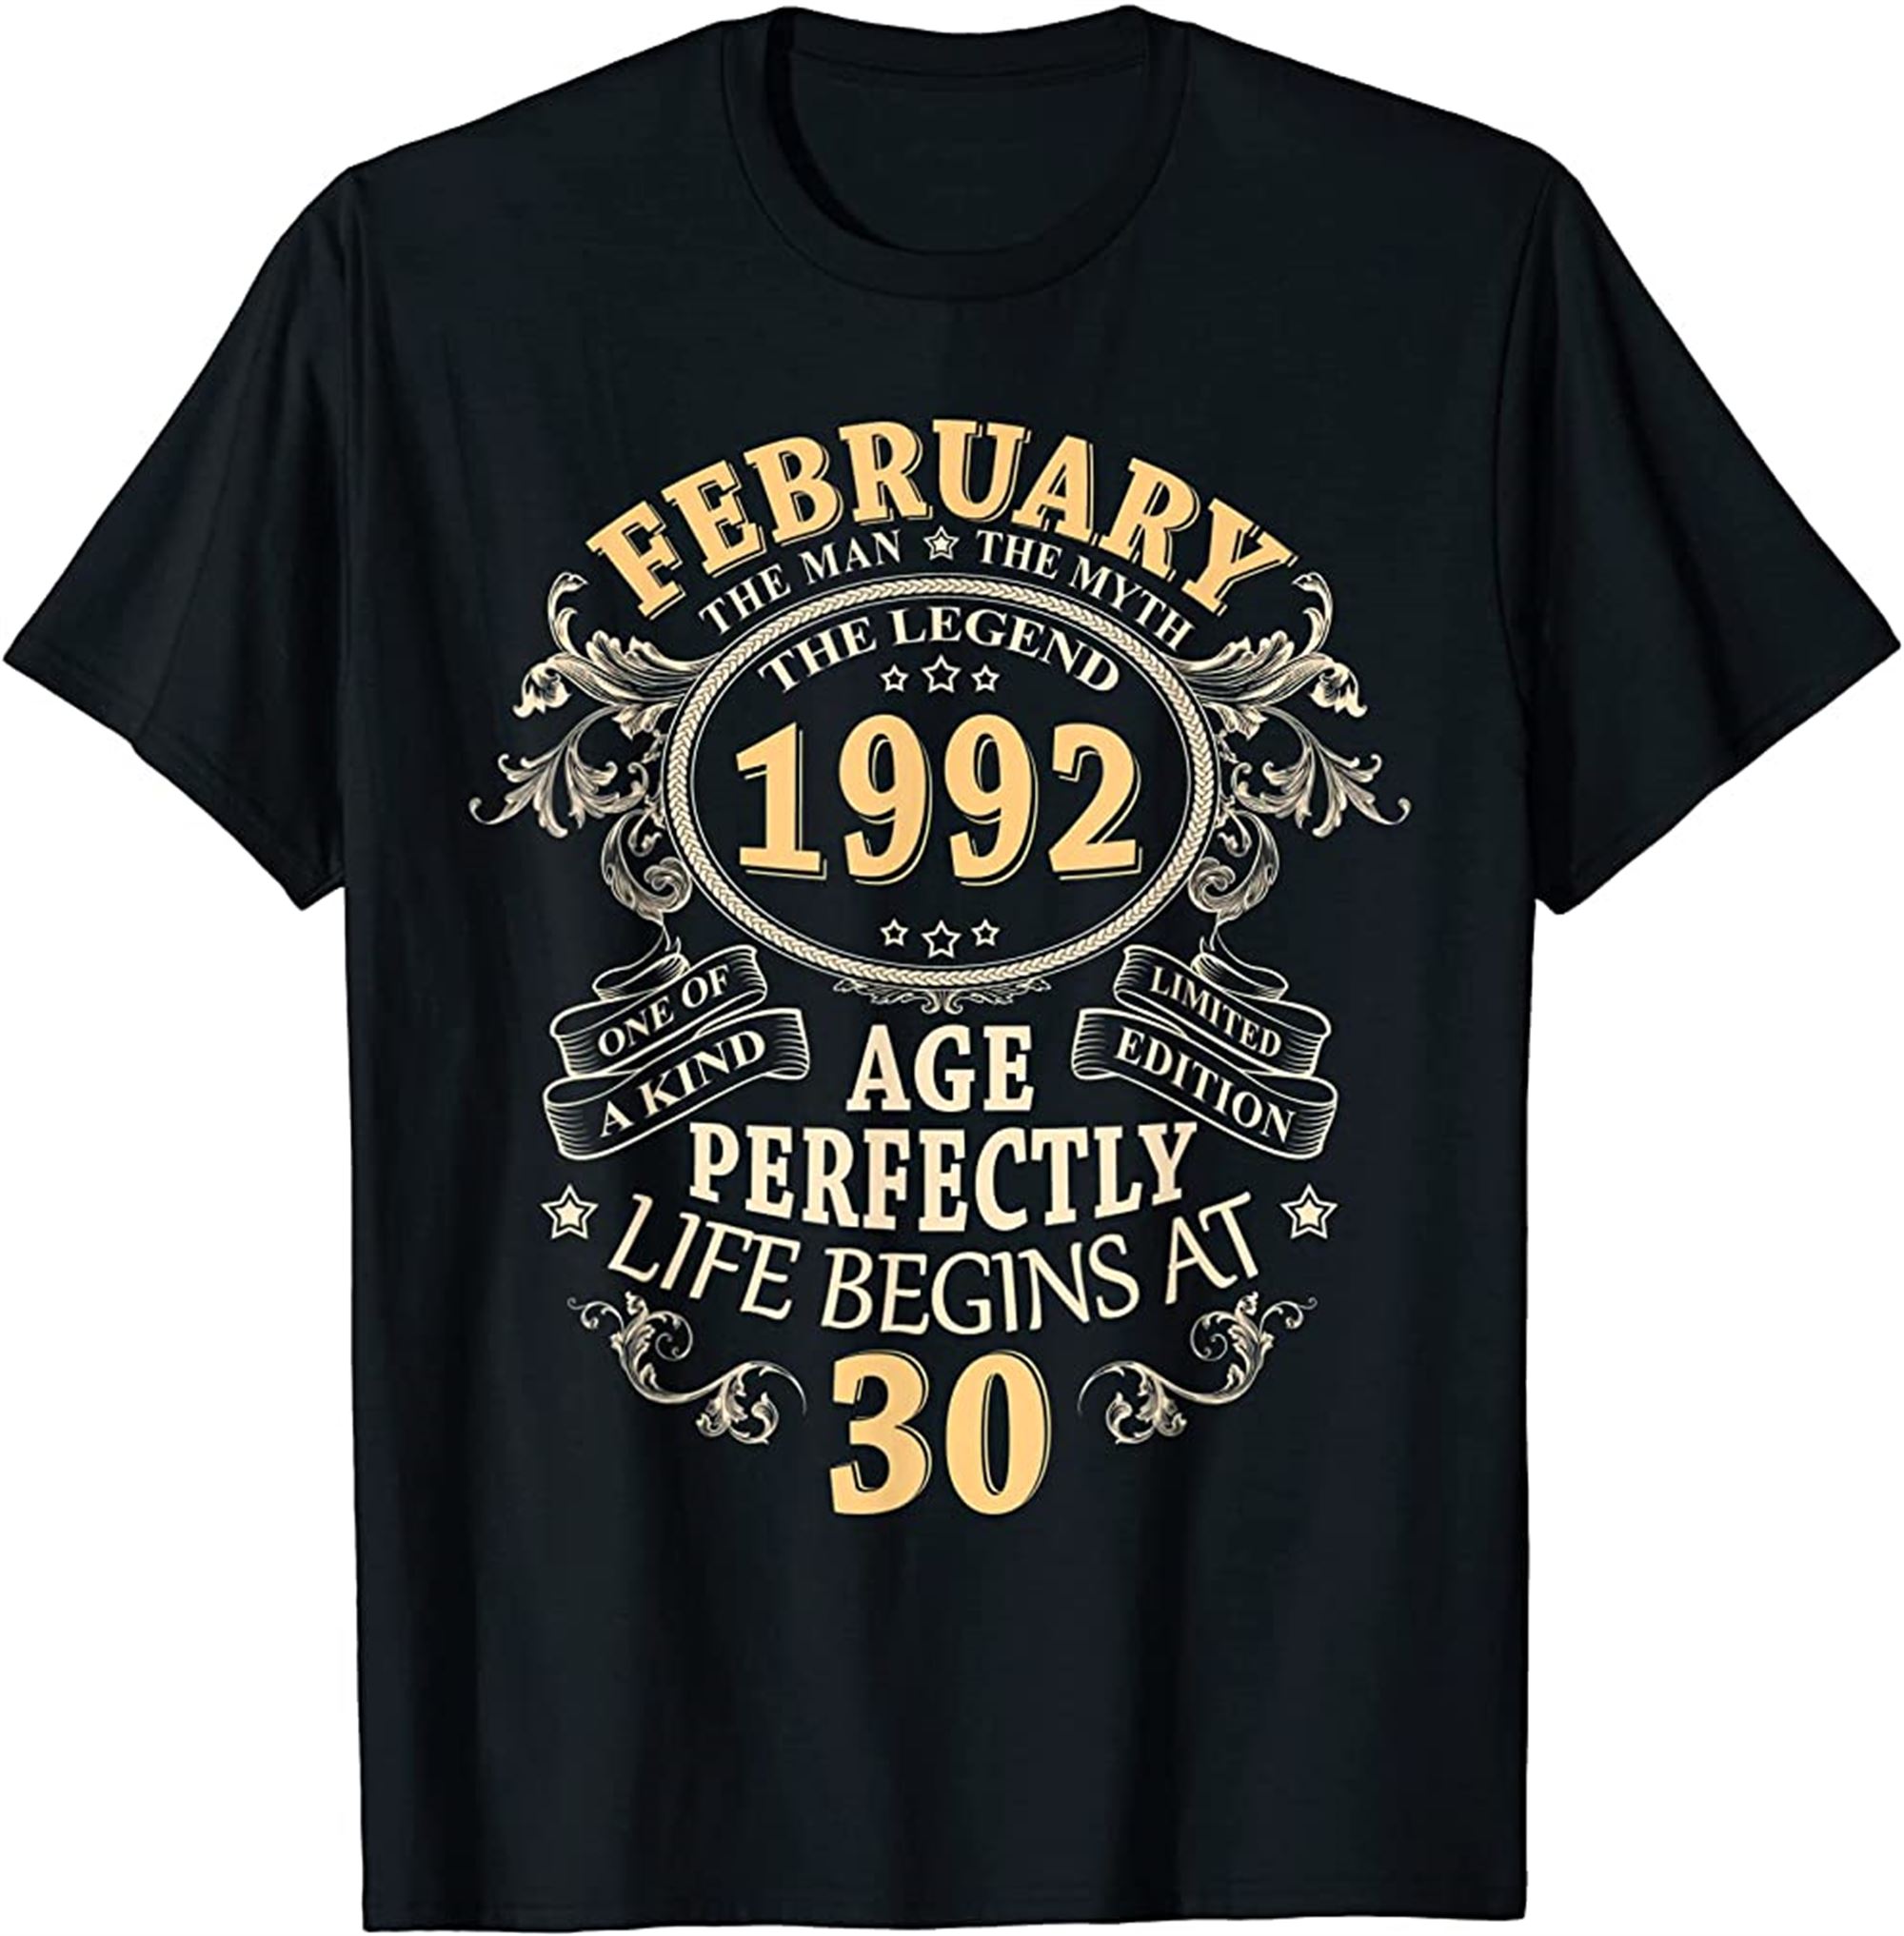 30 Year Old Gift February 1992 Limited Edition 30th Birthday T-shirt Full Size Up To 5xl